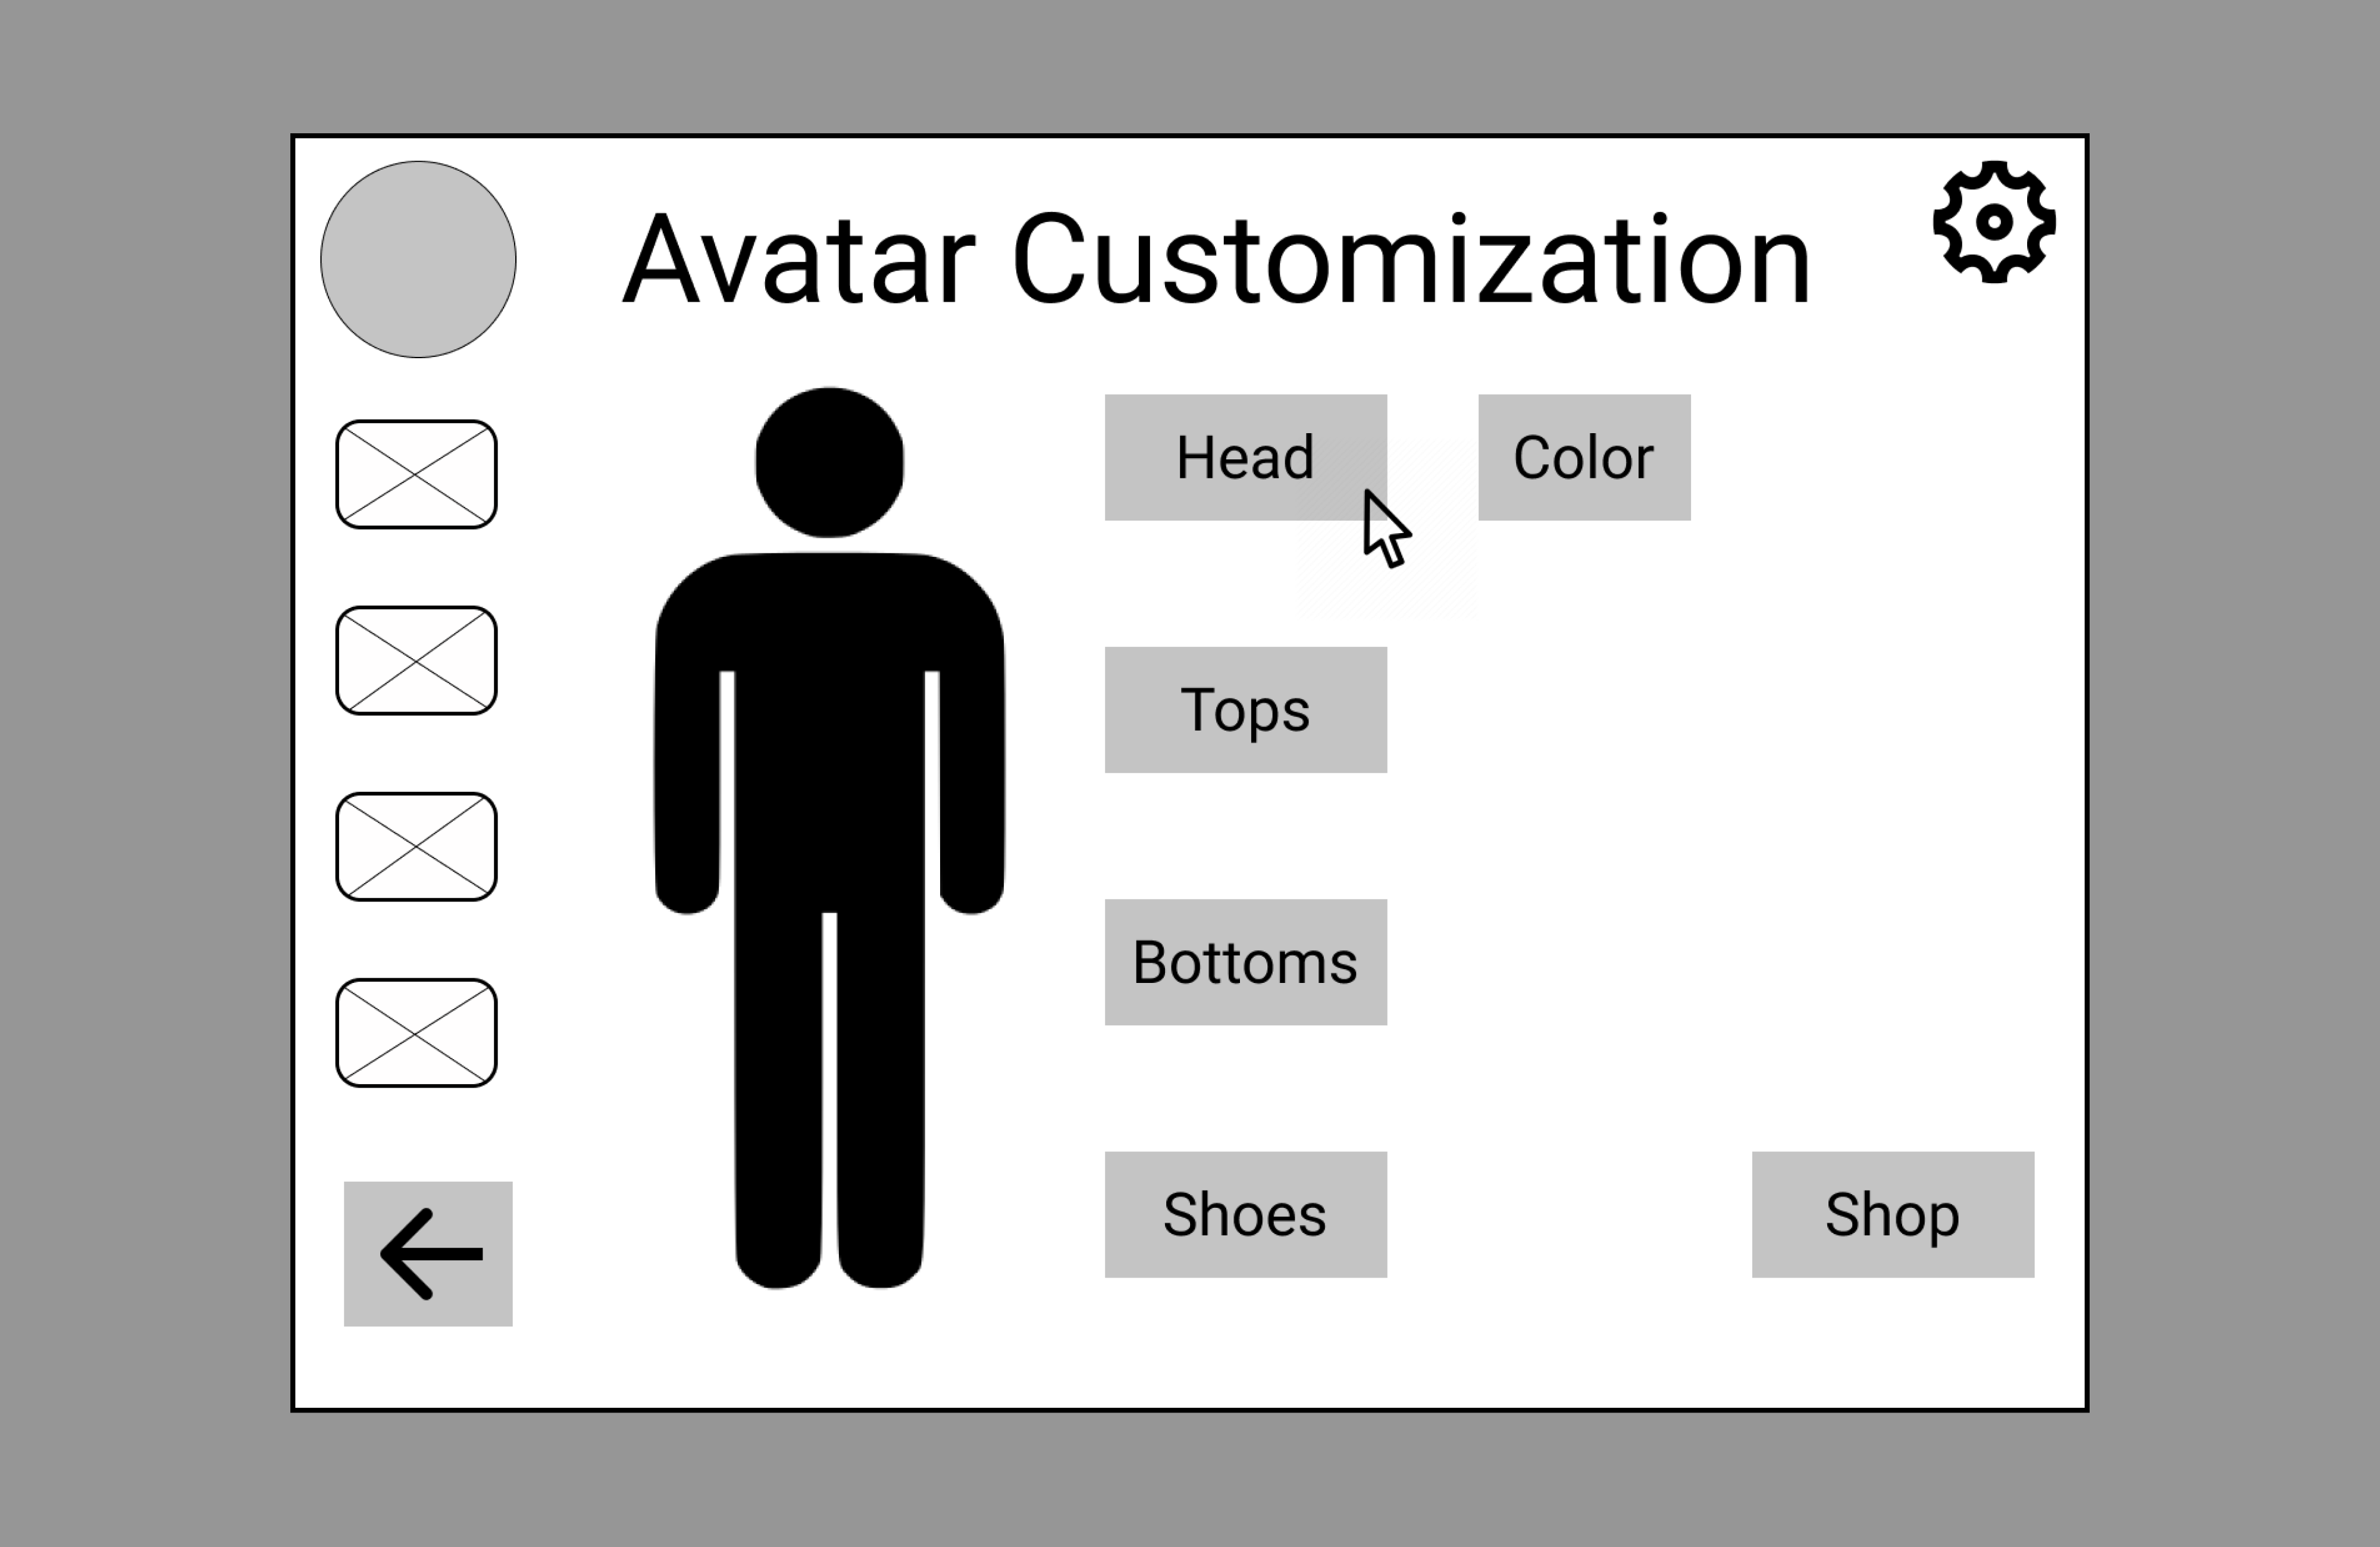 Wireframe for the cyberclass avatar customization view